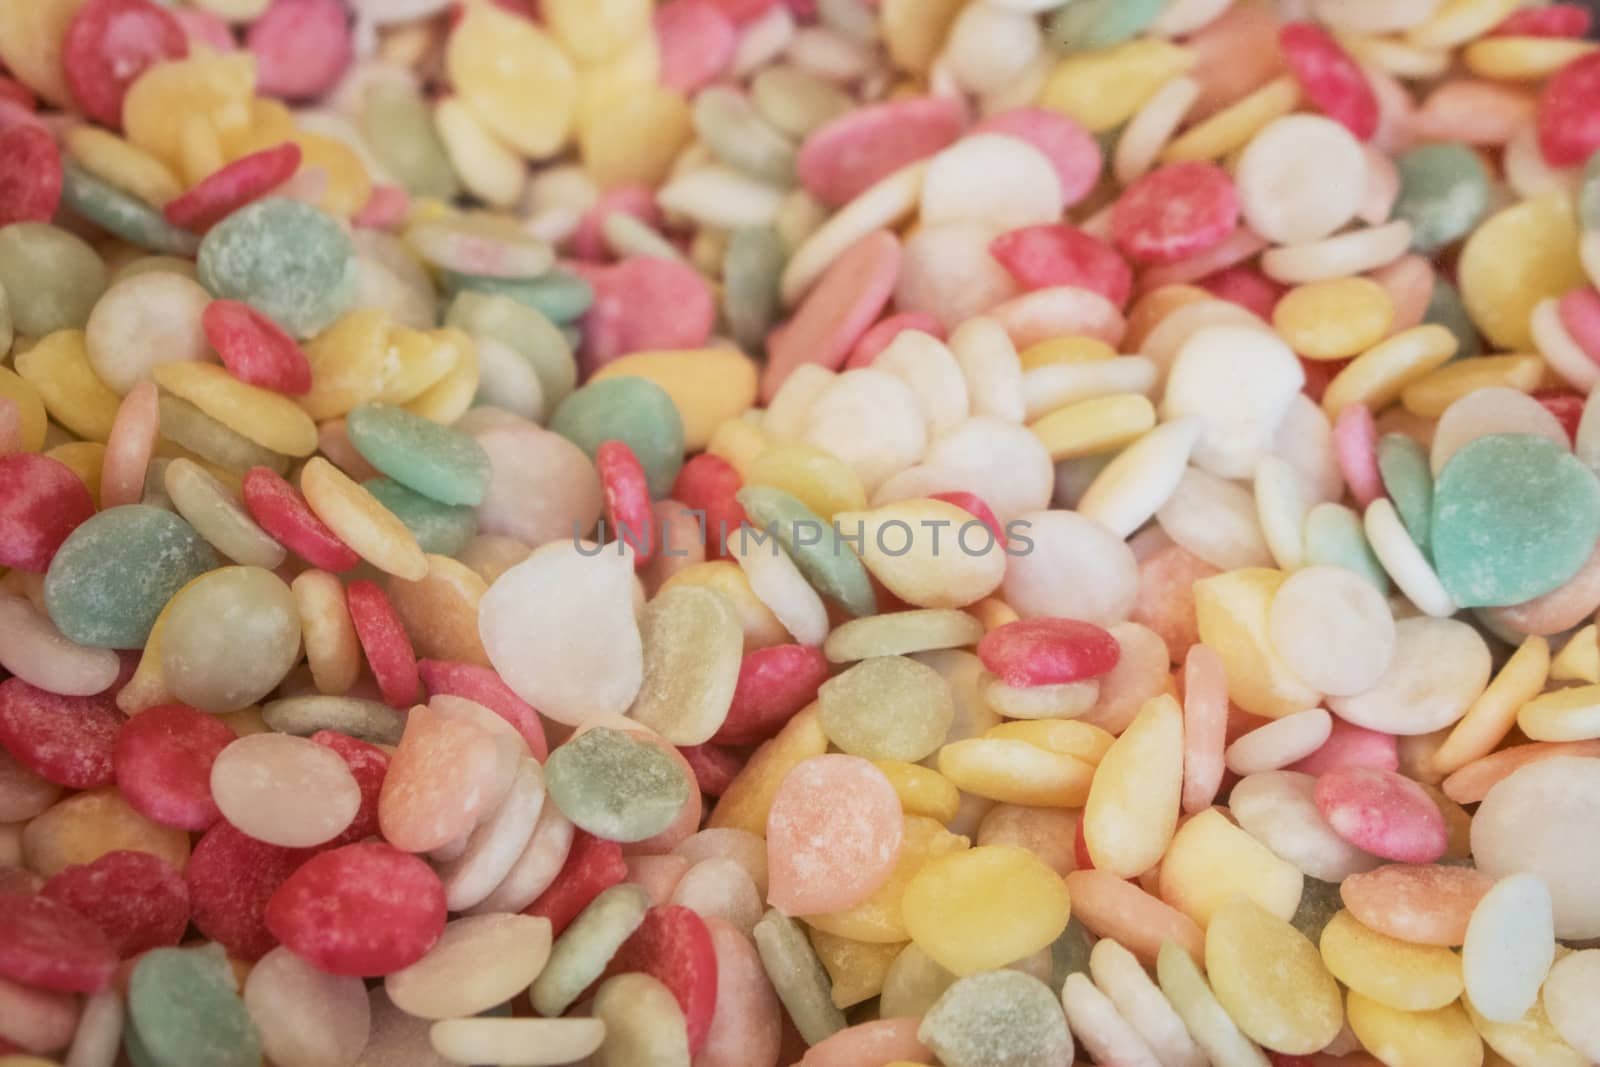 Group of colored candies background in a pastry shop